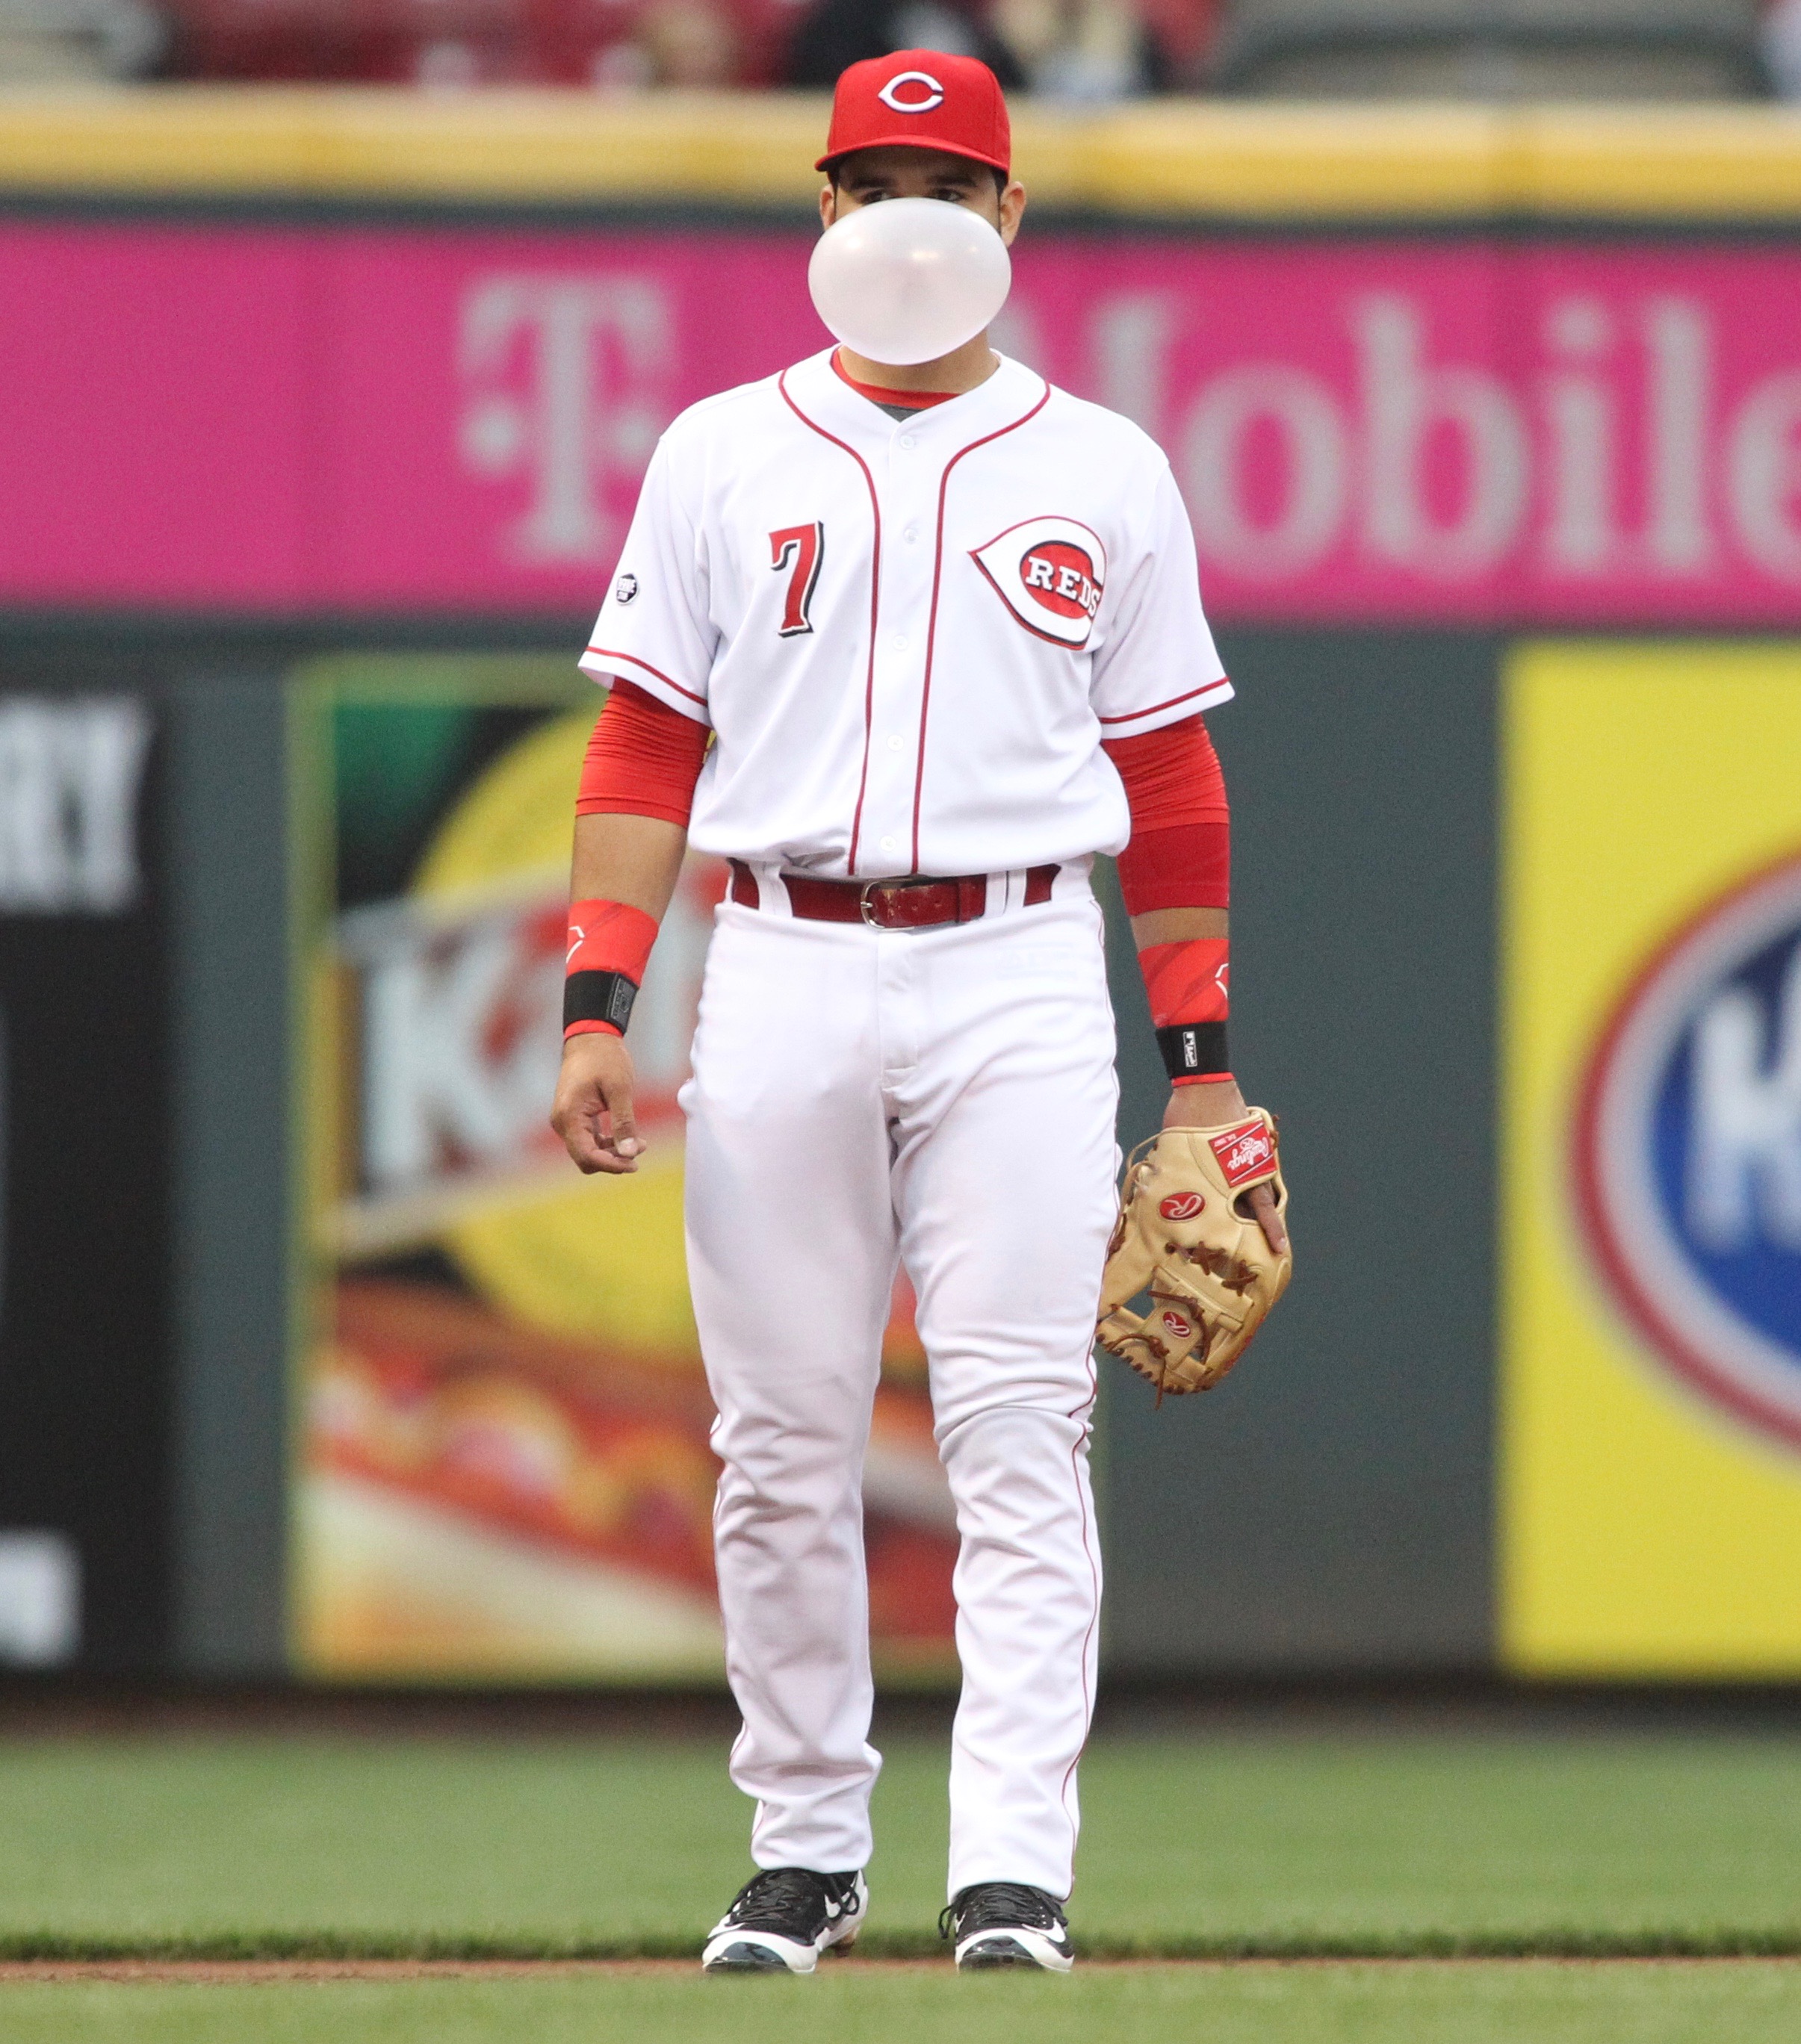 Reds' Eugenio Suarez may be best bubble gum blower in baseball